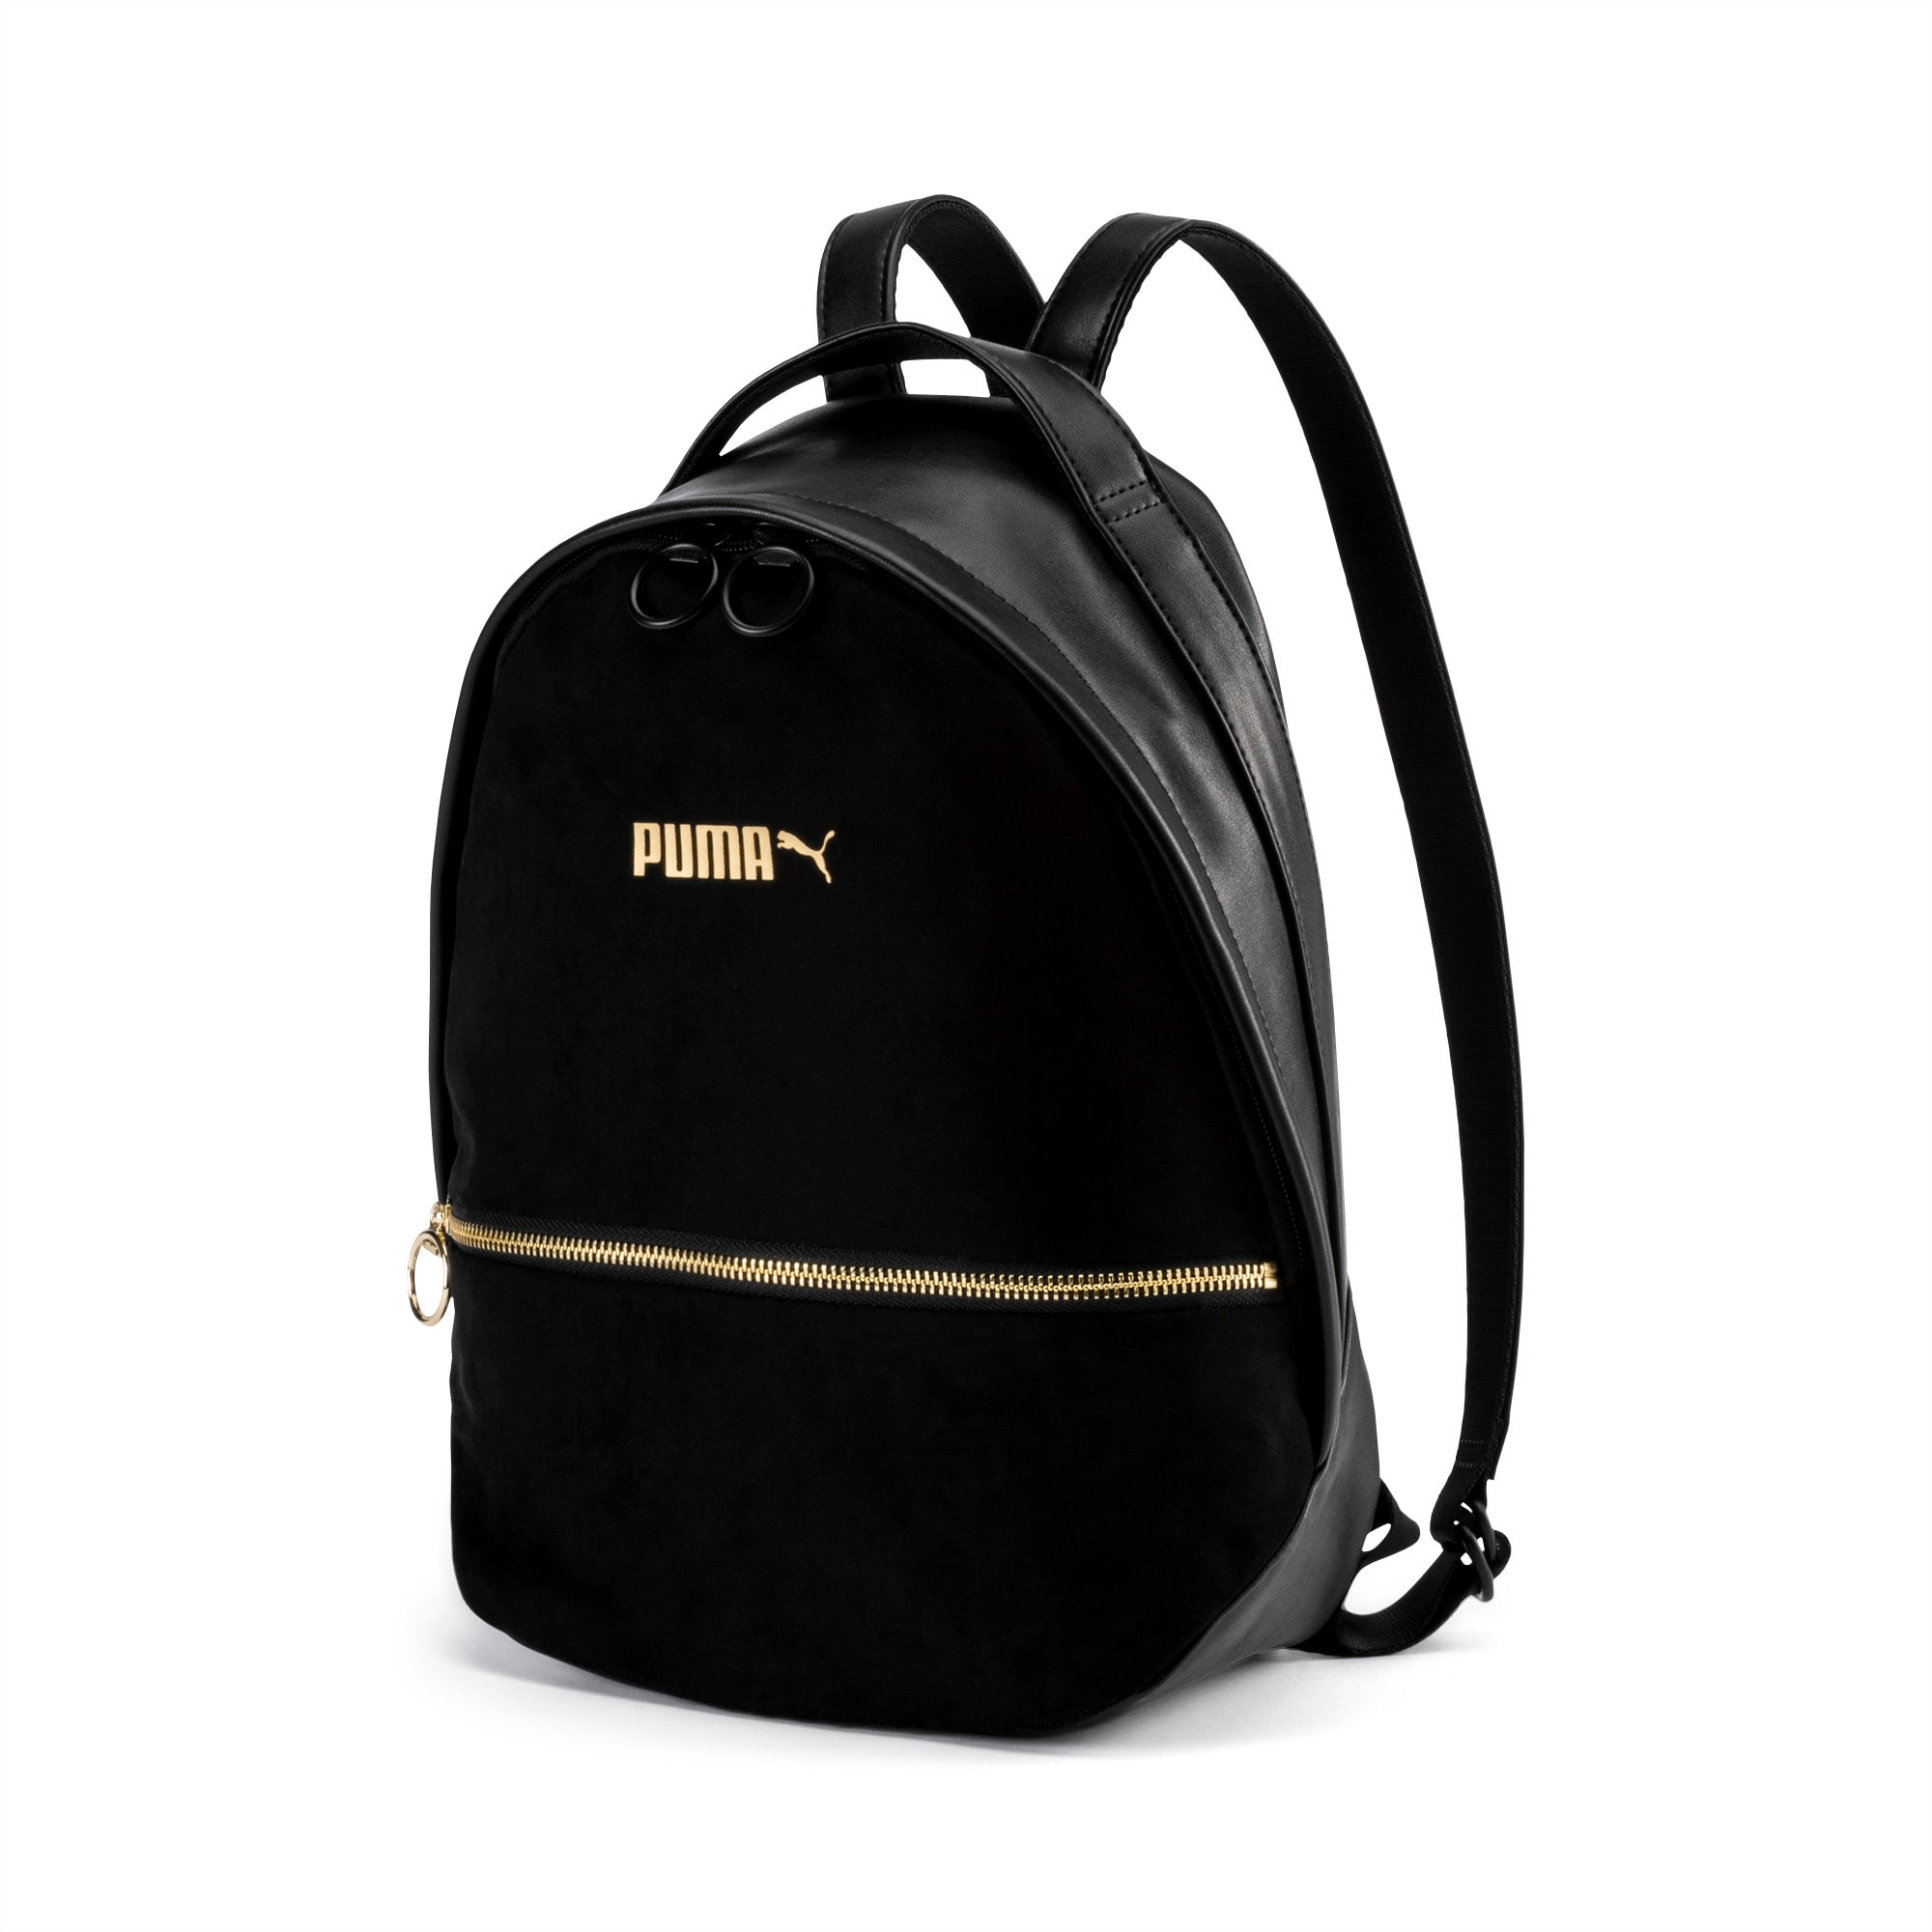 Archive Suede Women's Backpack | PUMA US